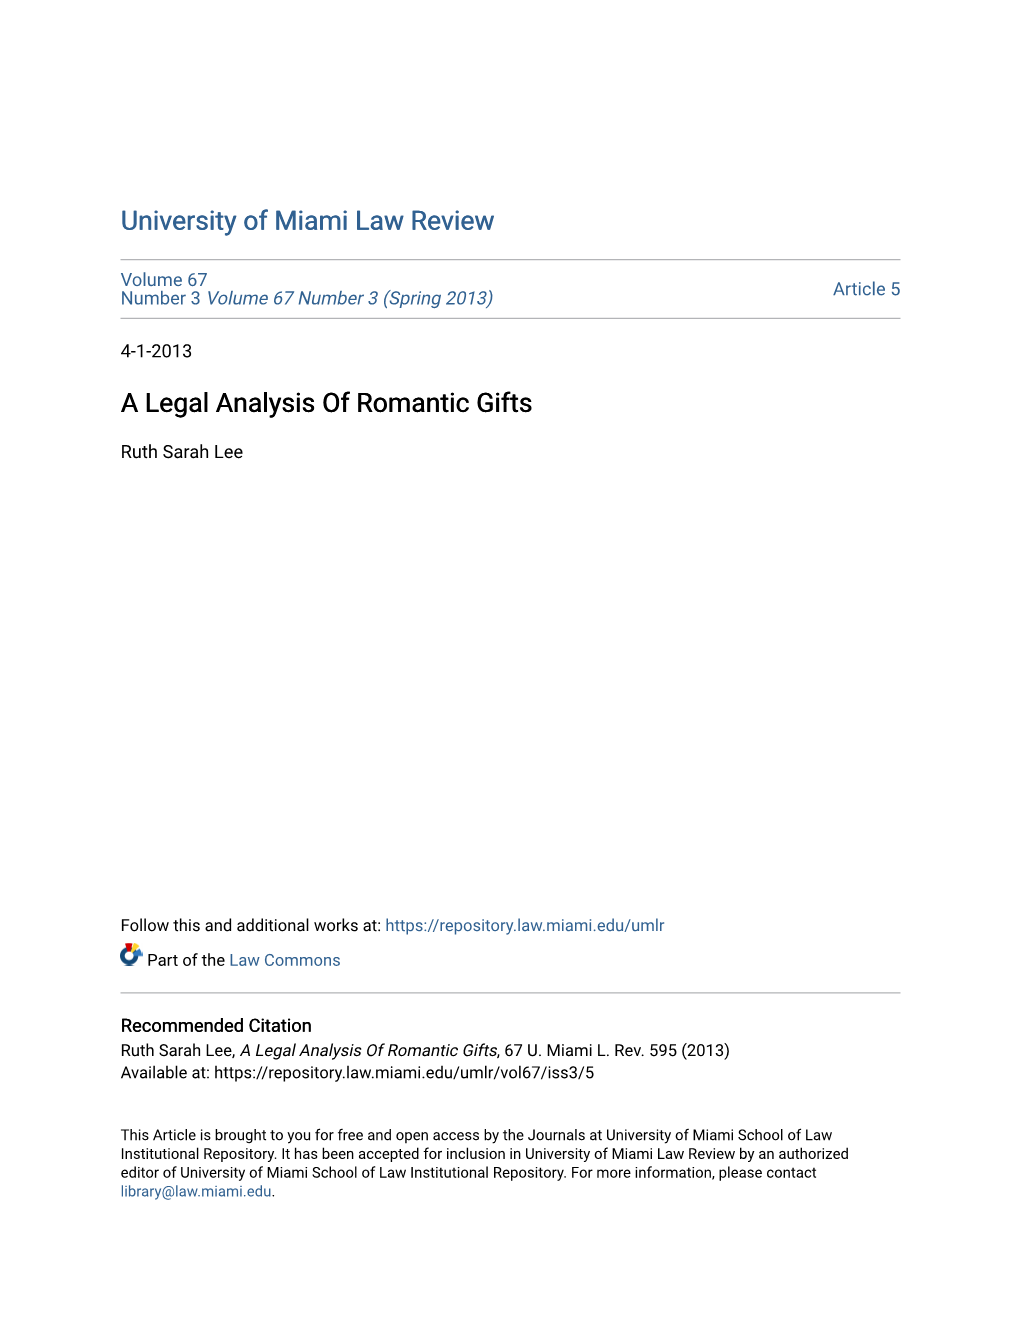 A Legal Analysis of Romantic Gifts